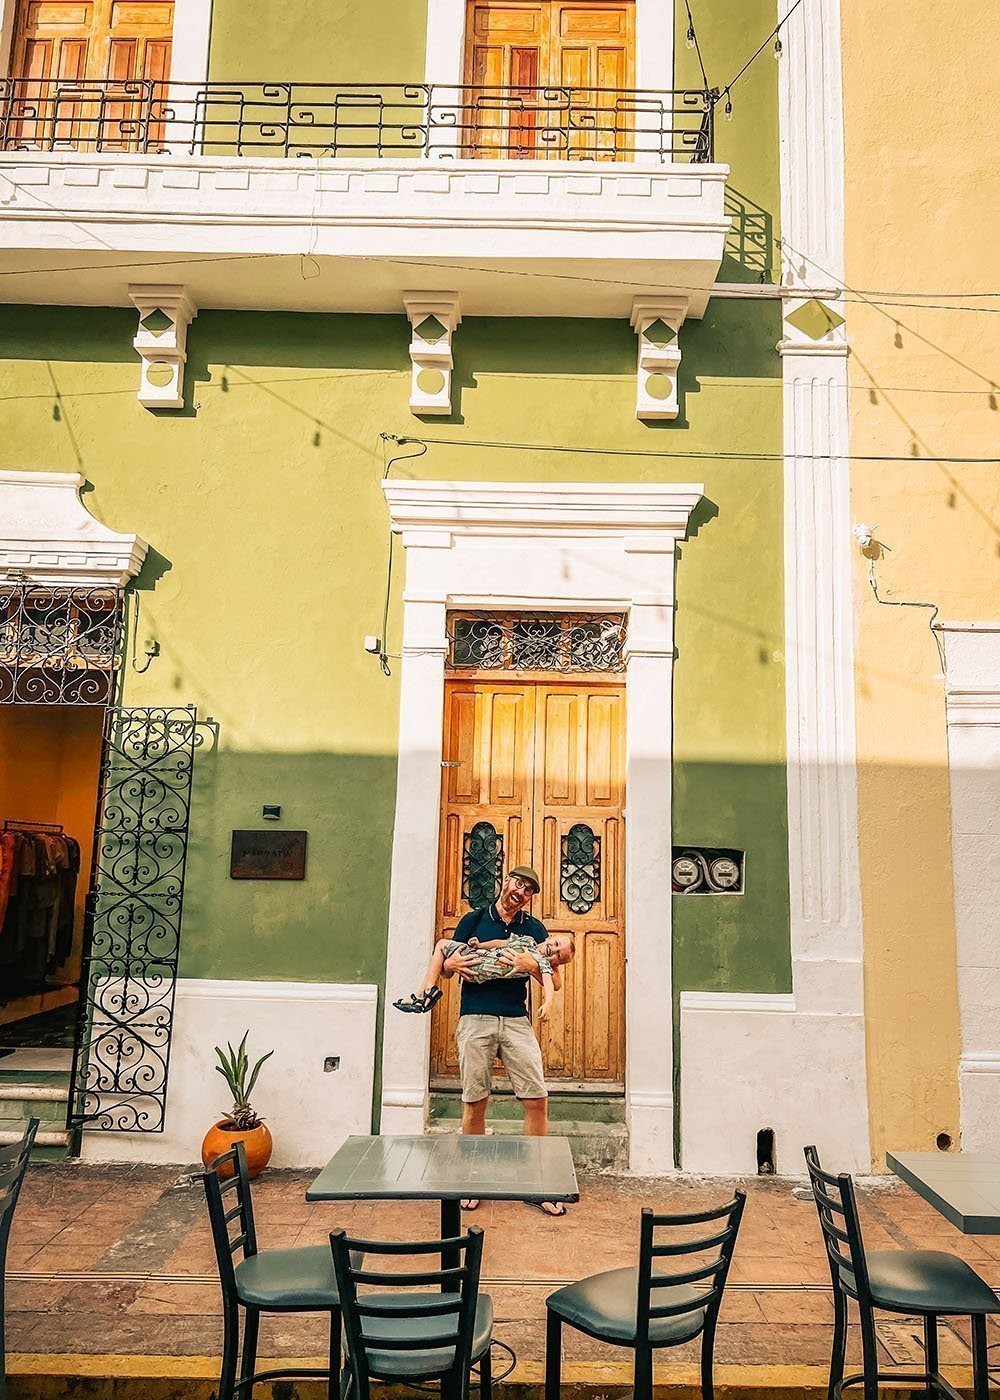 Outside a colorful building in Campeche - Mexico